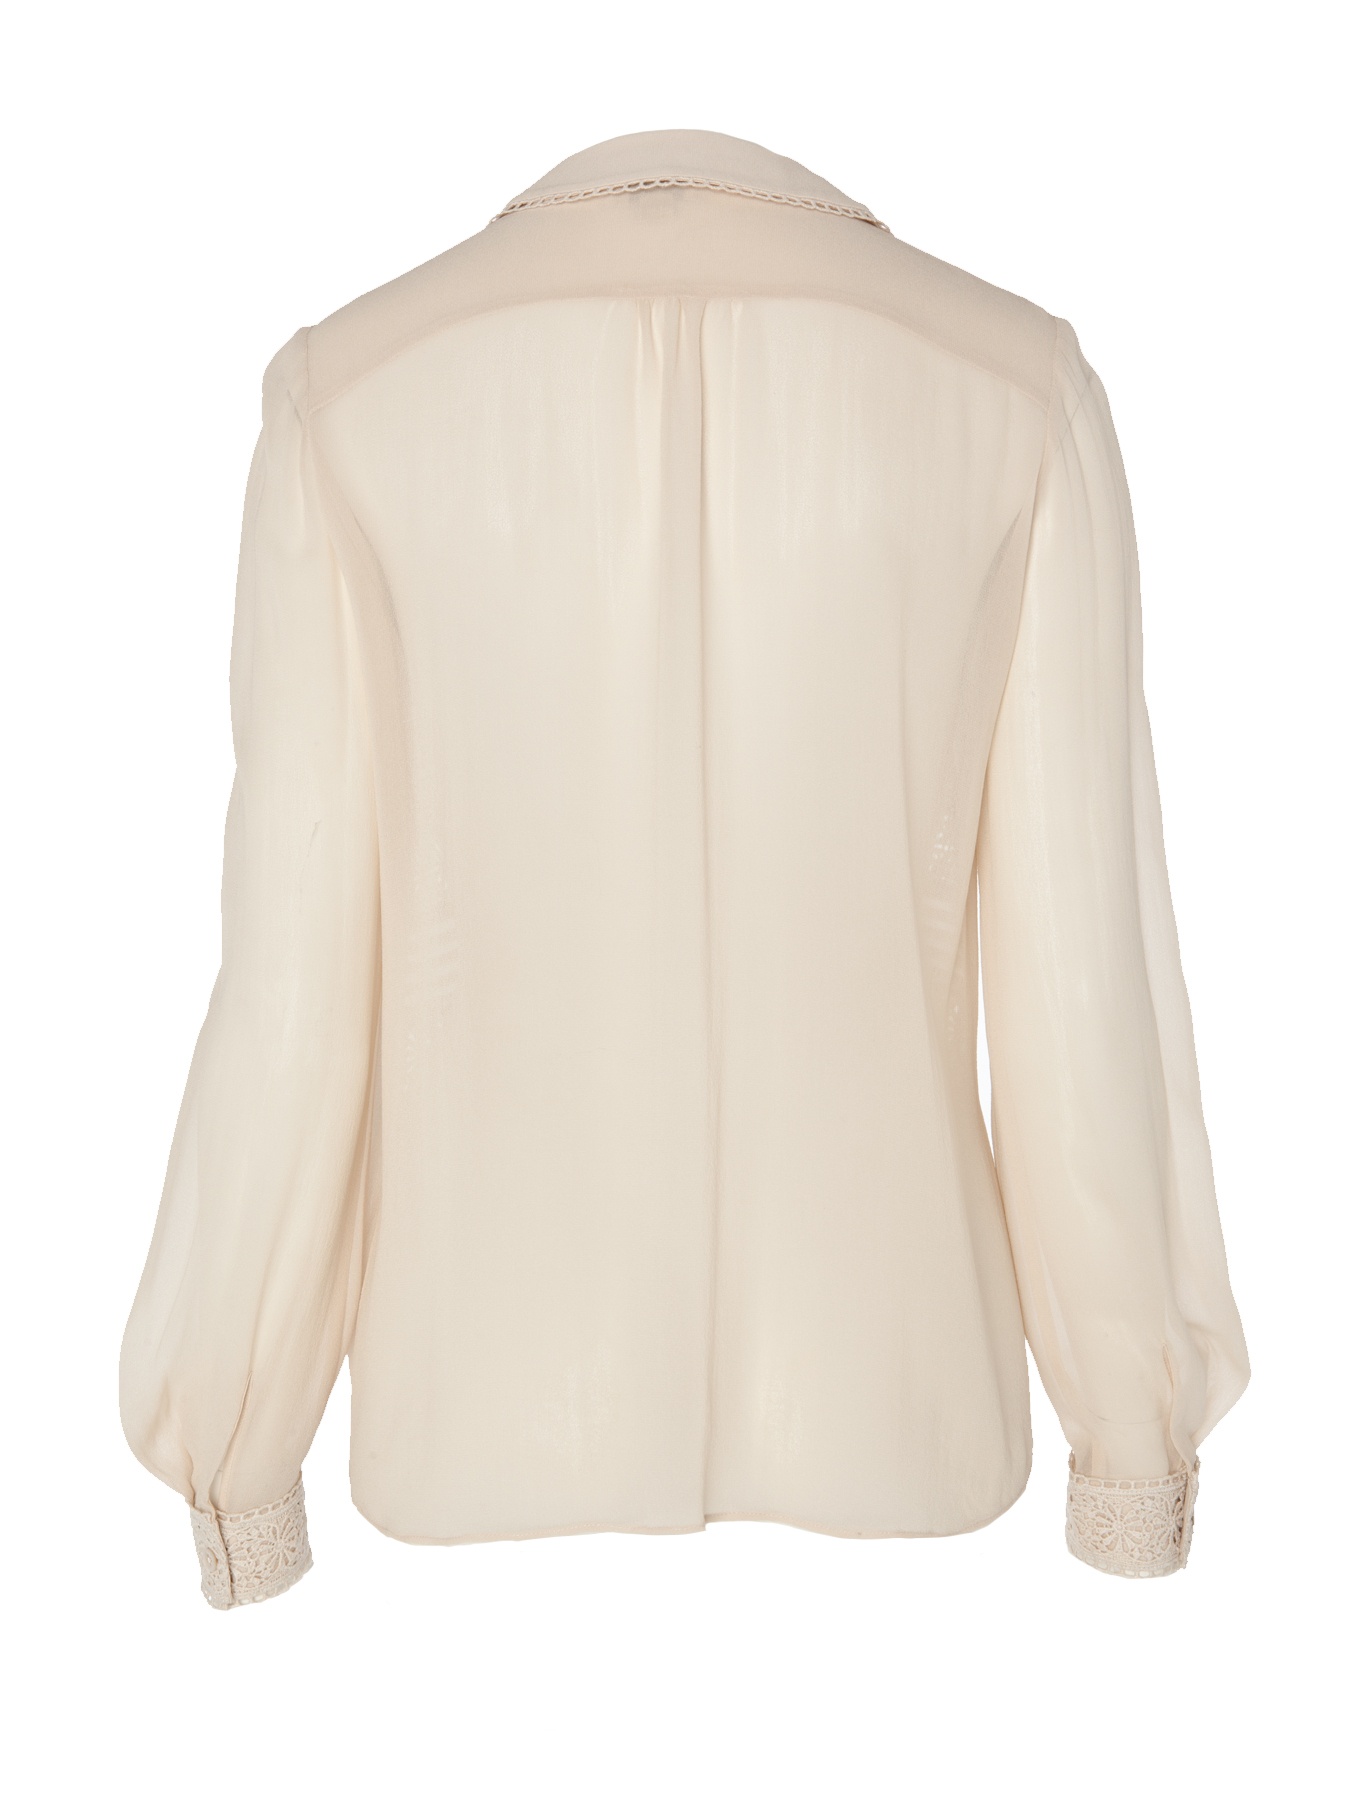 Temperley london Pleats and Lace Shirt in Natural | Lyst